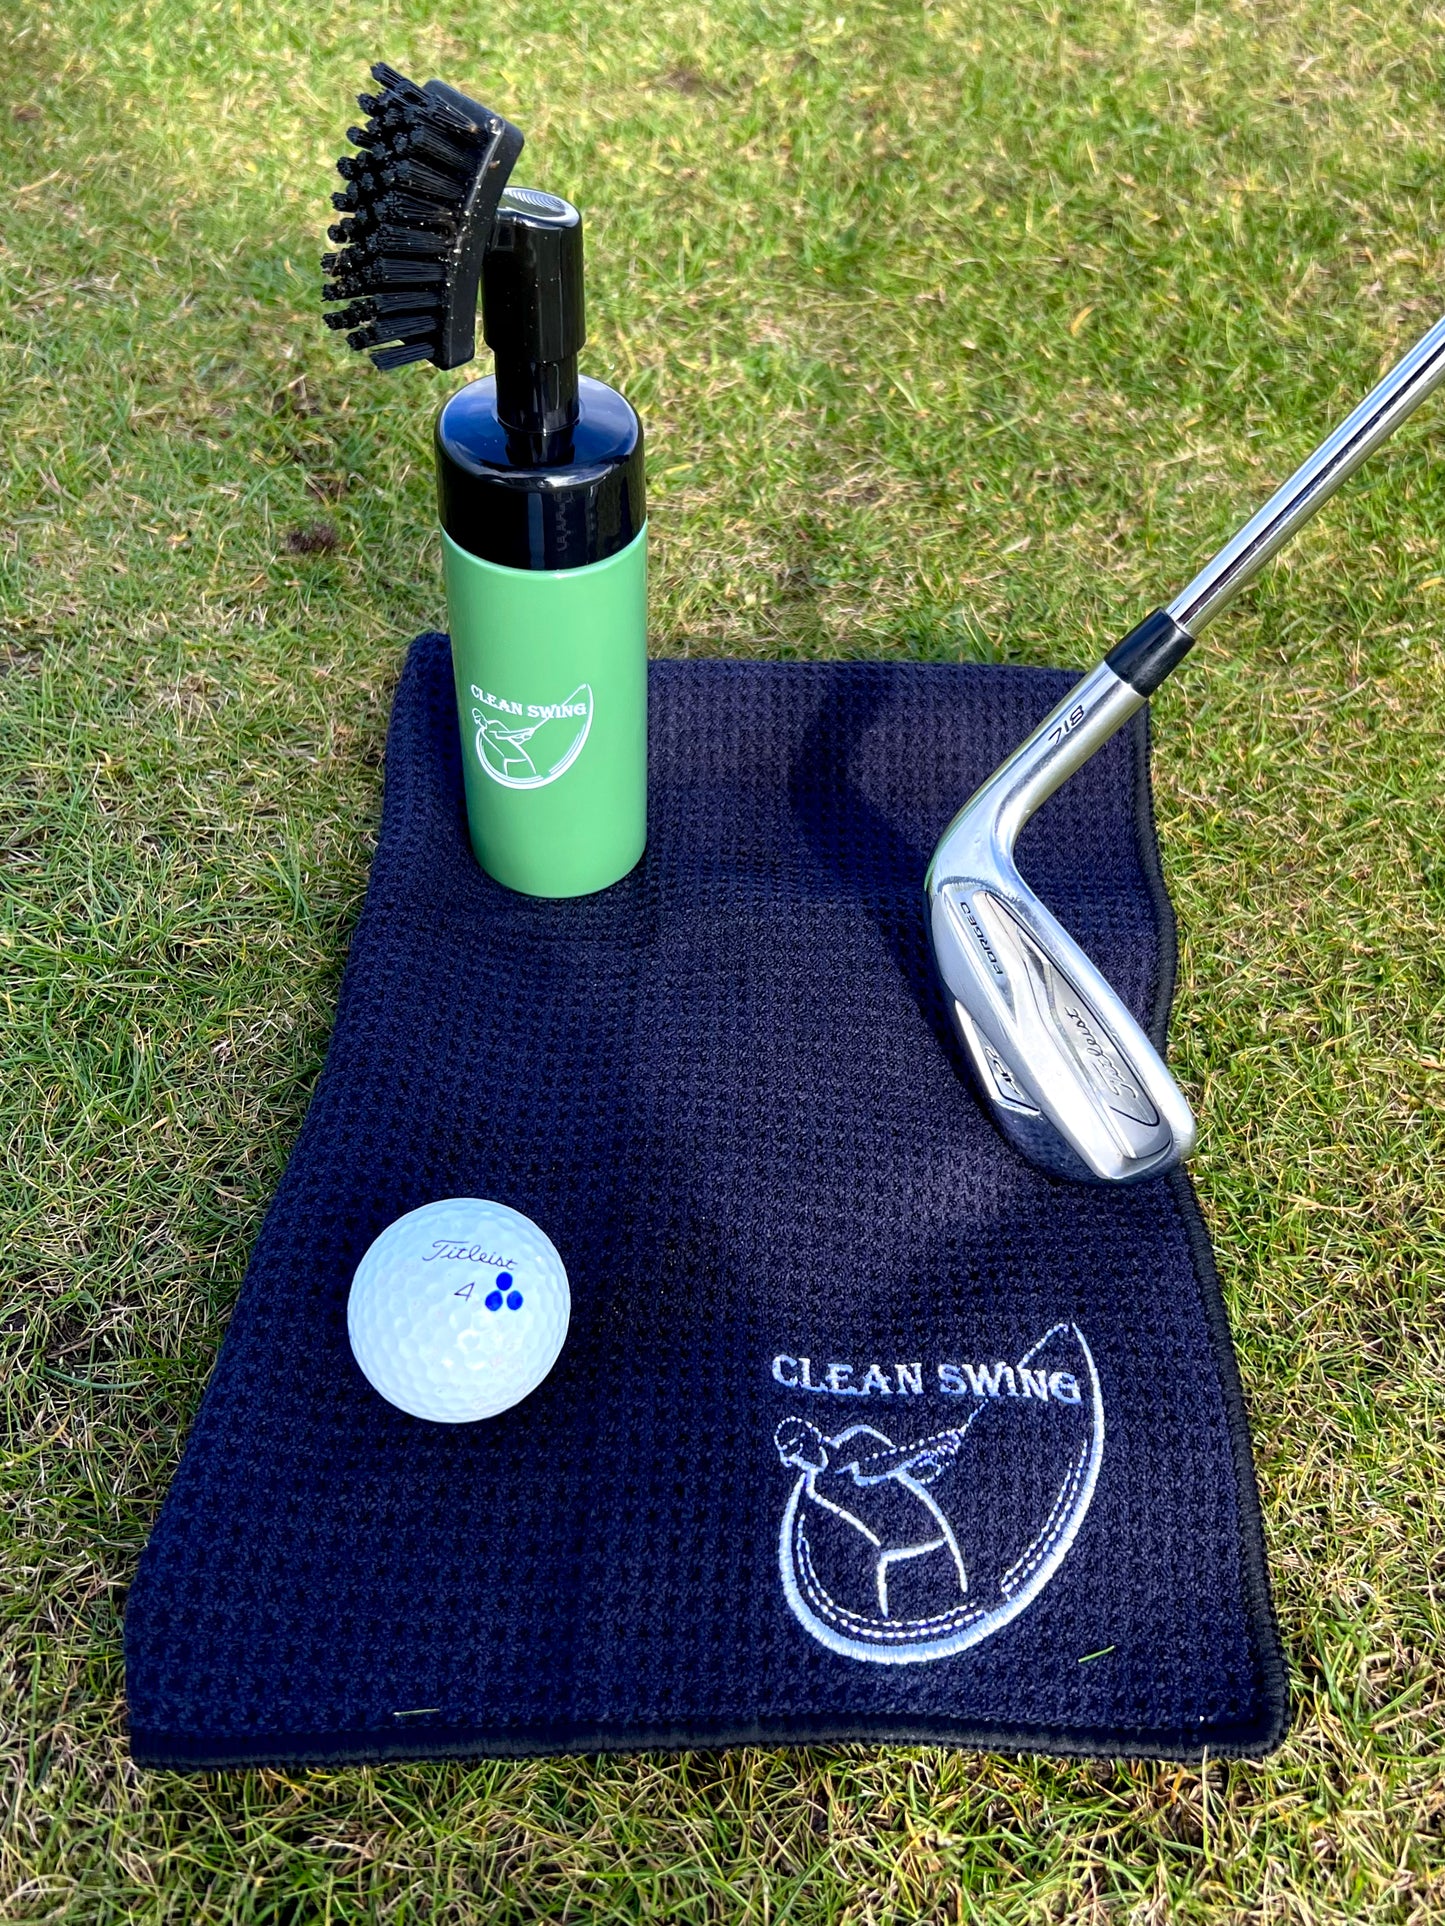 Clean Swing - Golf Club Brush and Towel - Green